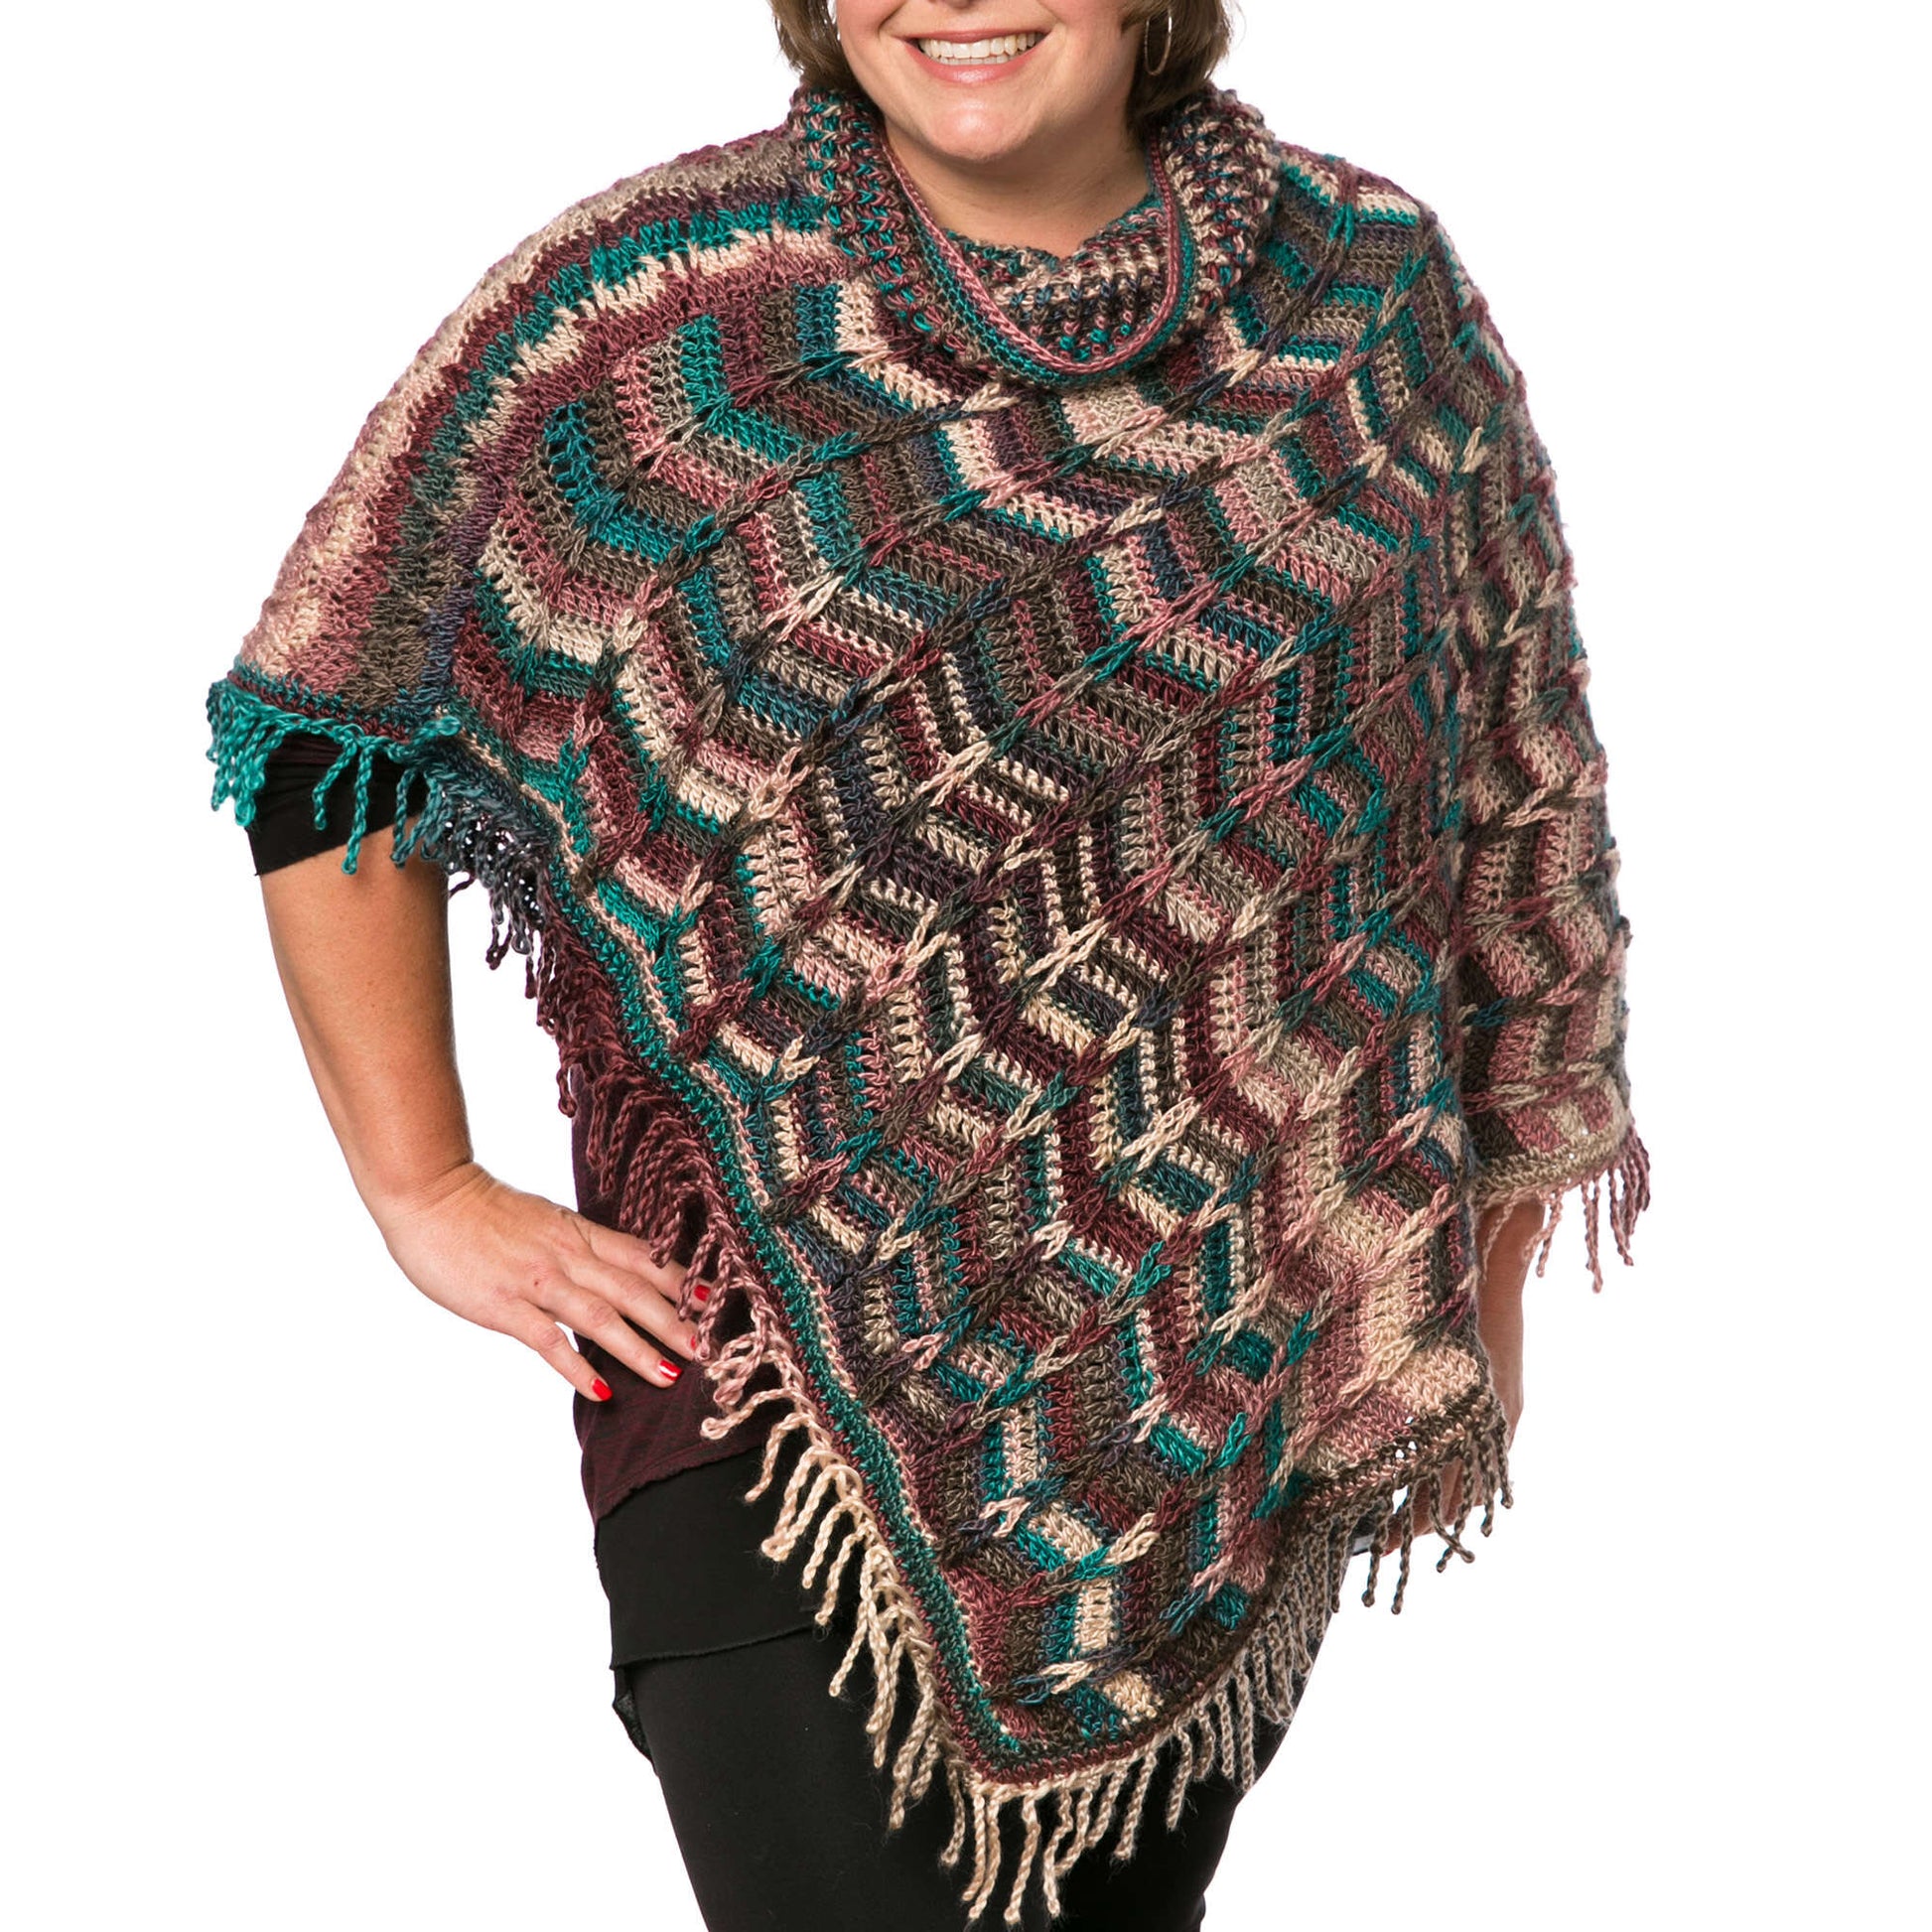 Free Red Heart Marly's Perfect Simple Cowl Poncho Crochet Pattern